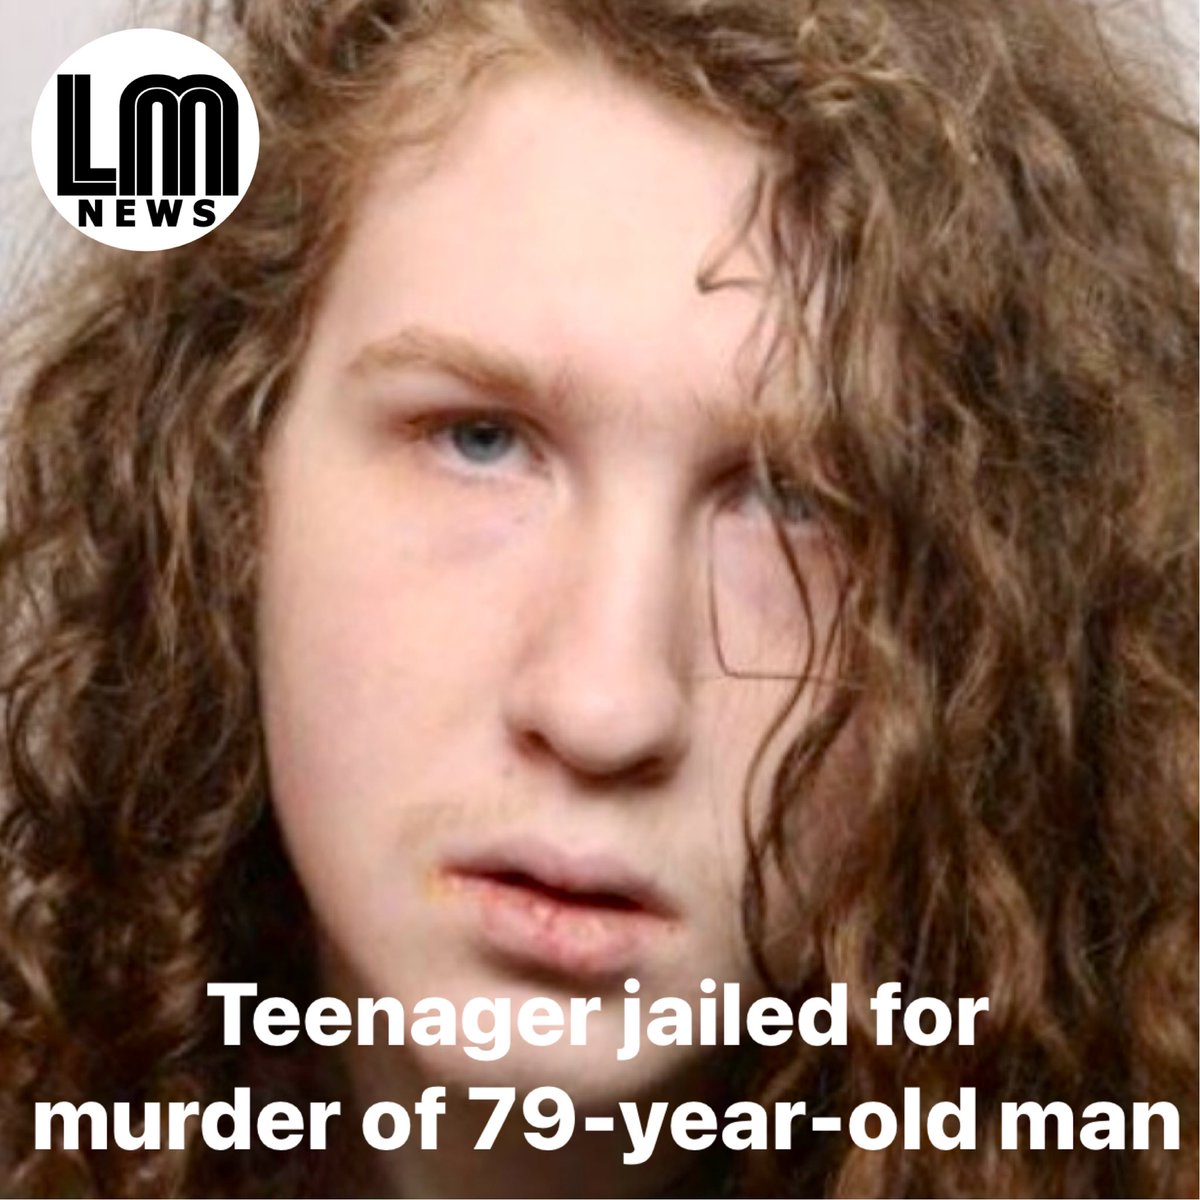 A teenager who walked into a house and fatally stabbed a 79-year-old man has been sentenced to life imprisonment with a minimum of 25 years. Daniel Rounce, 18, had initially fled the scene after stabbing Gerald Wickes at a house in Queens Park Way, Leicester, on the afternoon of